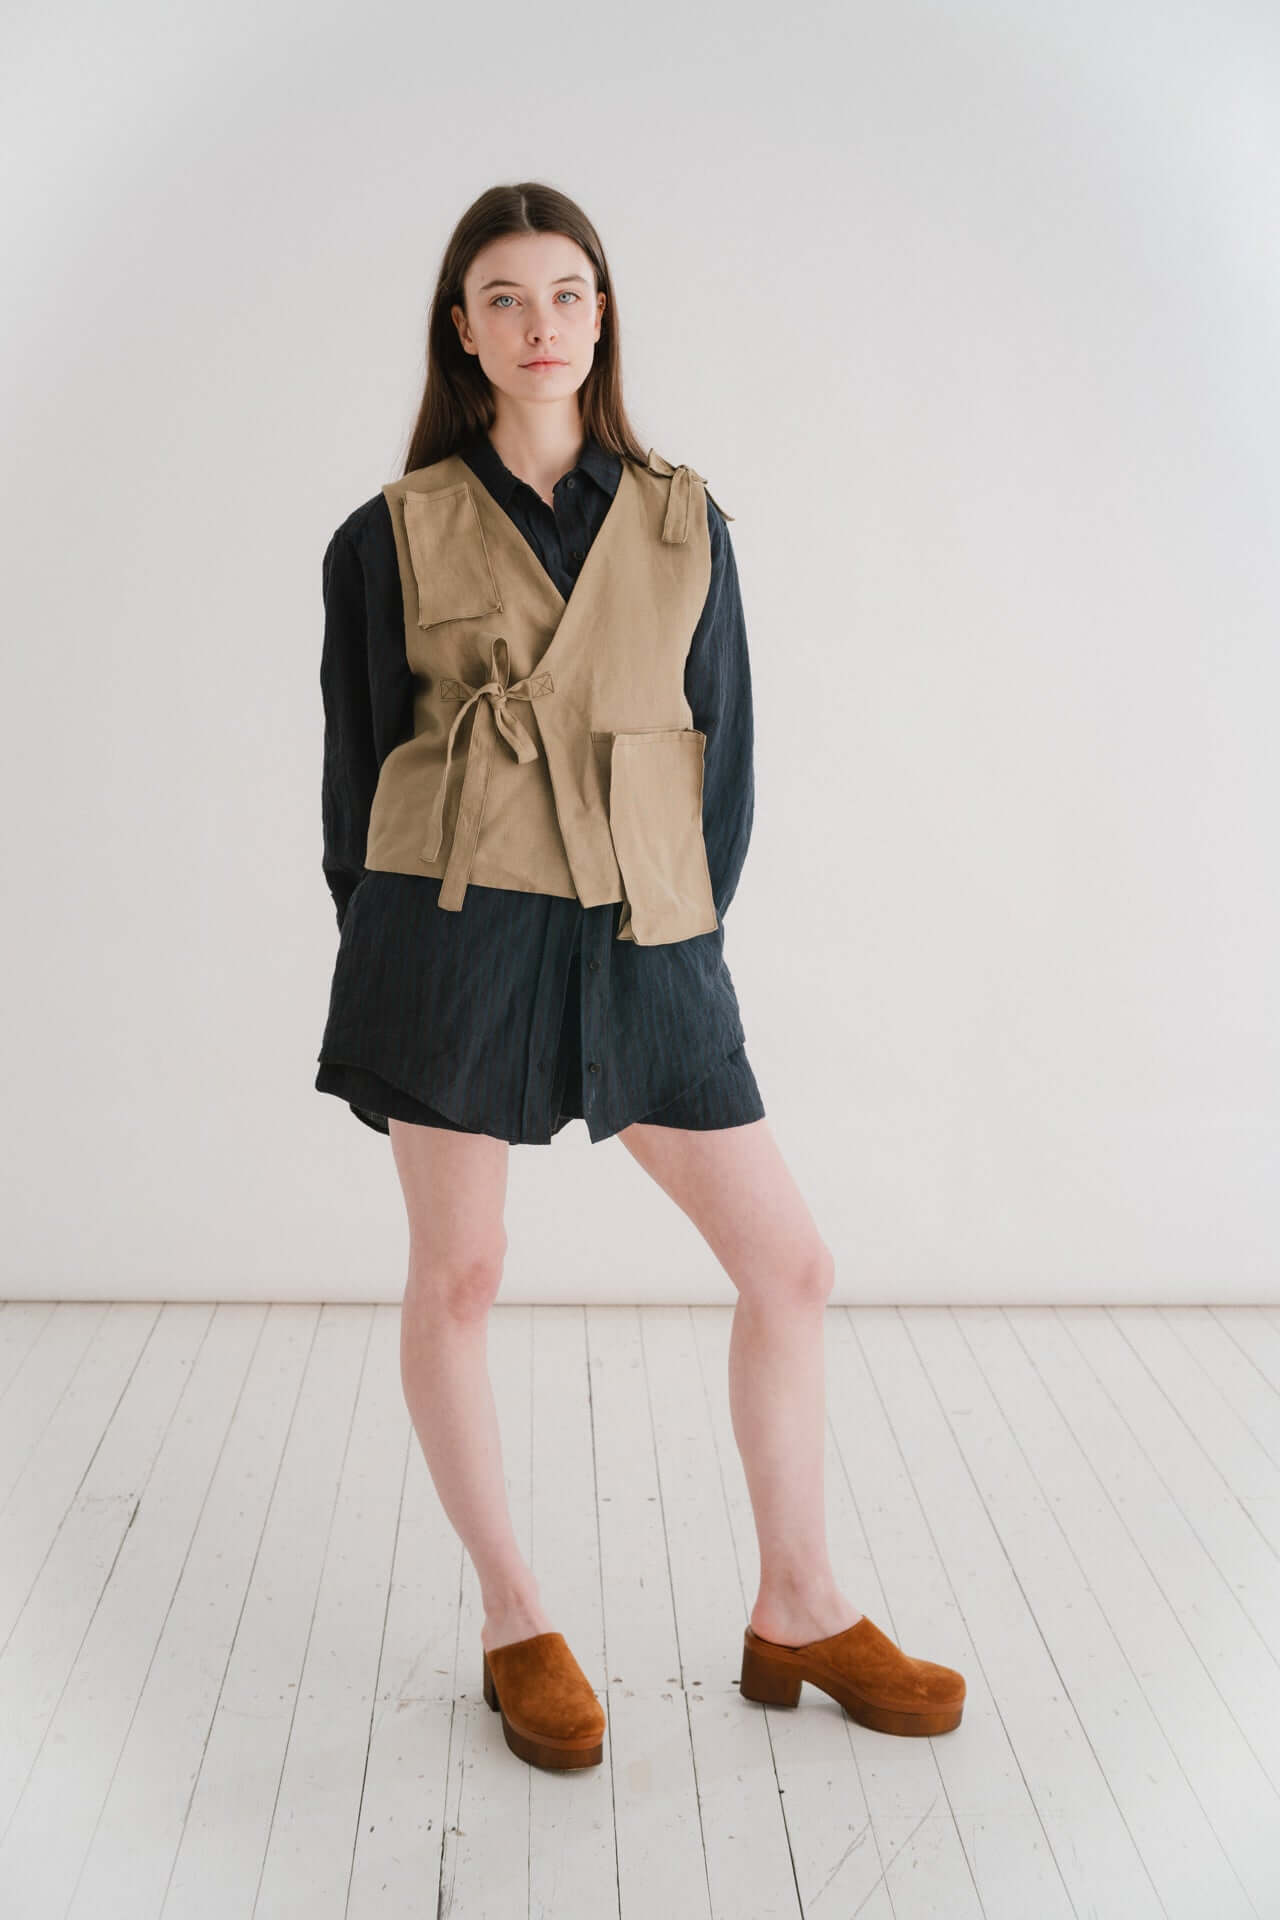 IN THE WILD VEST | A play on a traditional safari jacket, our new ‘In The Wild’ vest is fun worn by itself or as a layering piece for your Spring Summer wardrobe. A simple shape with tie closure detail, three cargo style pockets and bow detail on shoulder